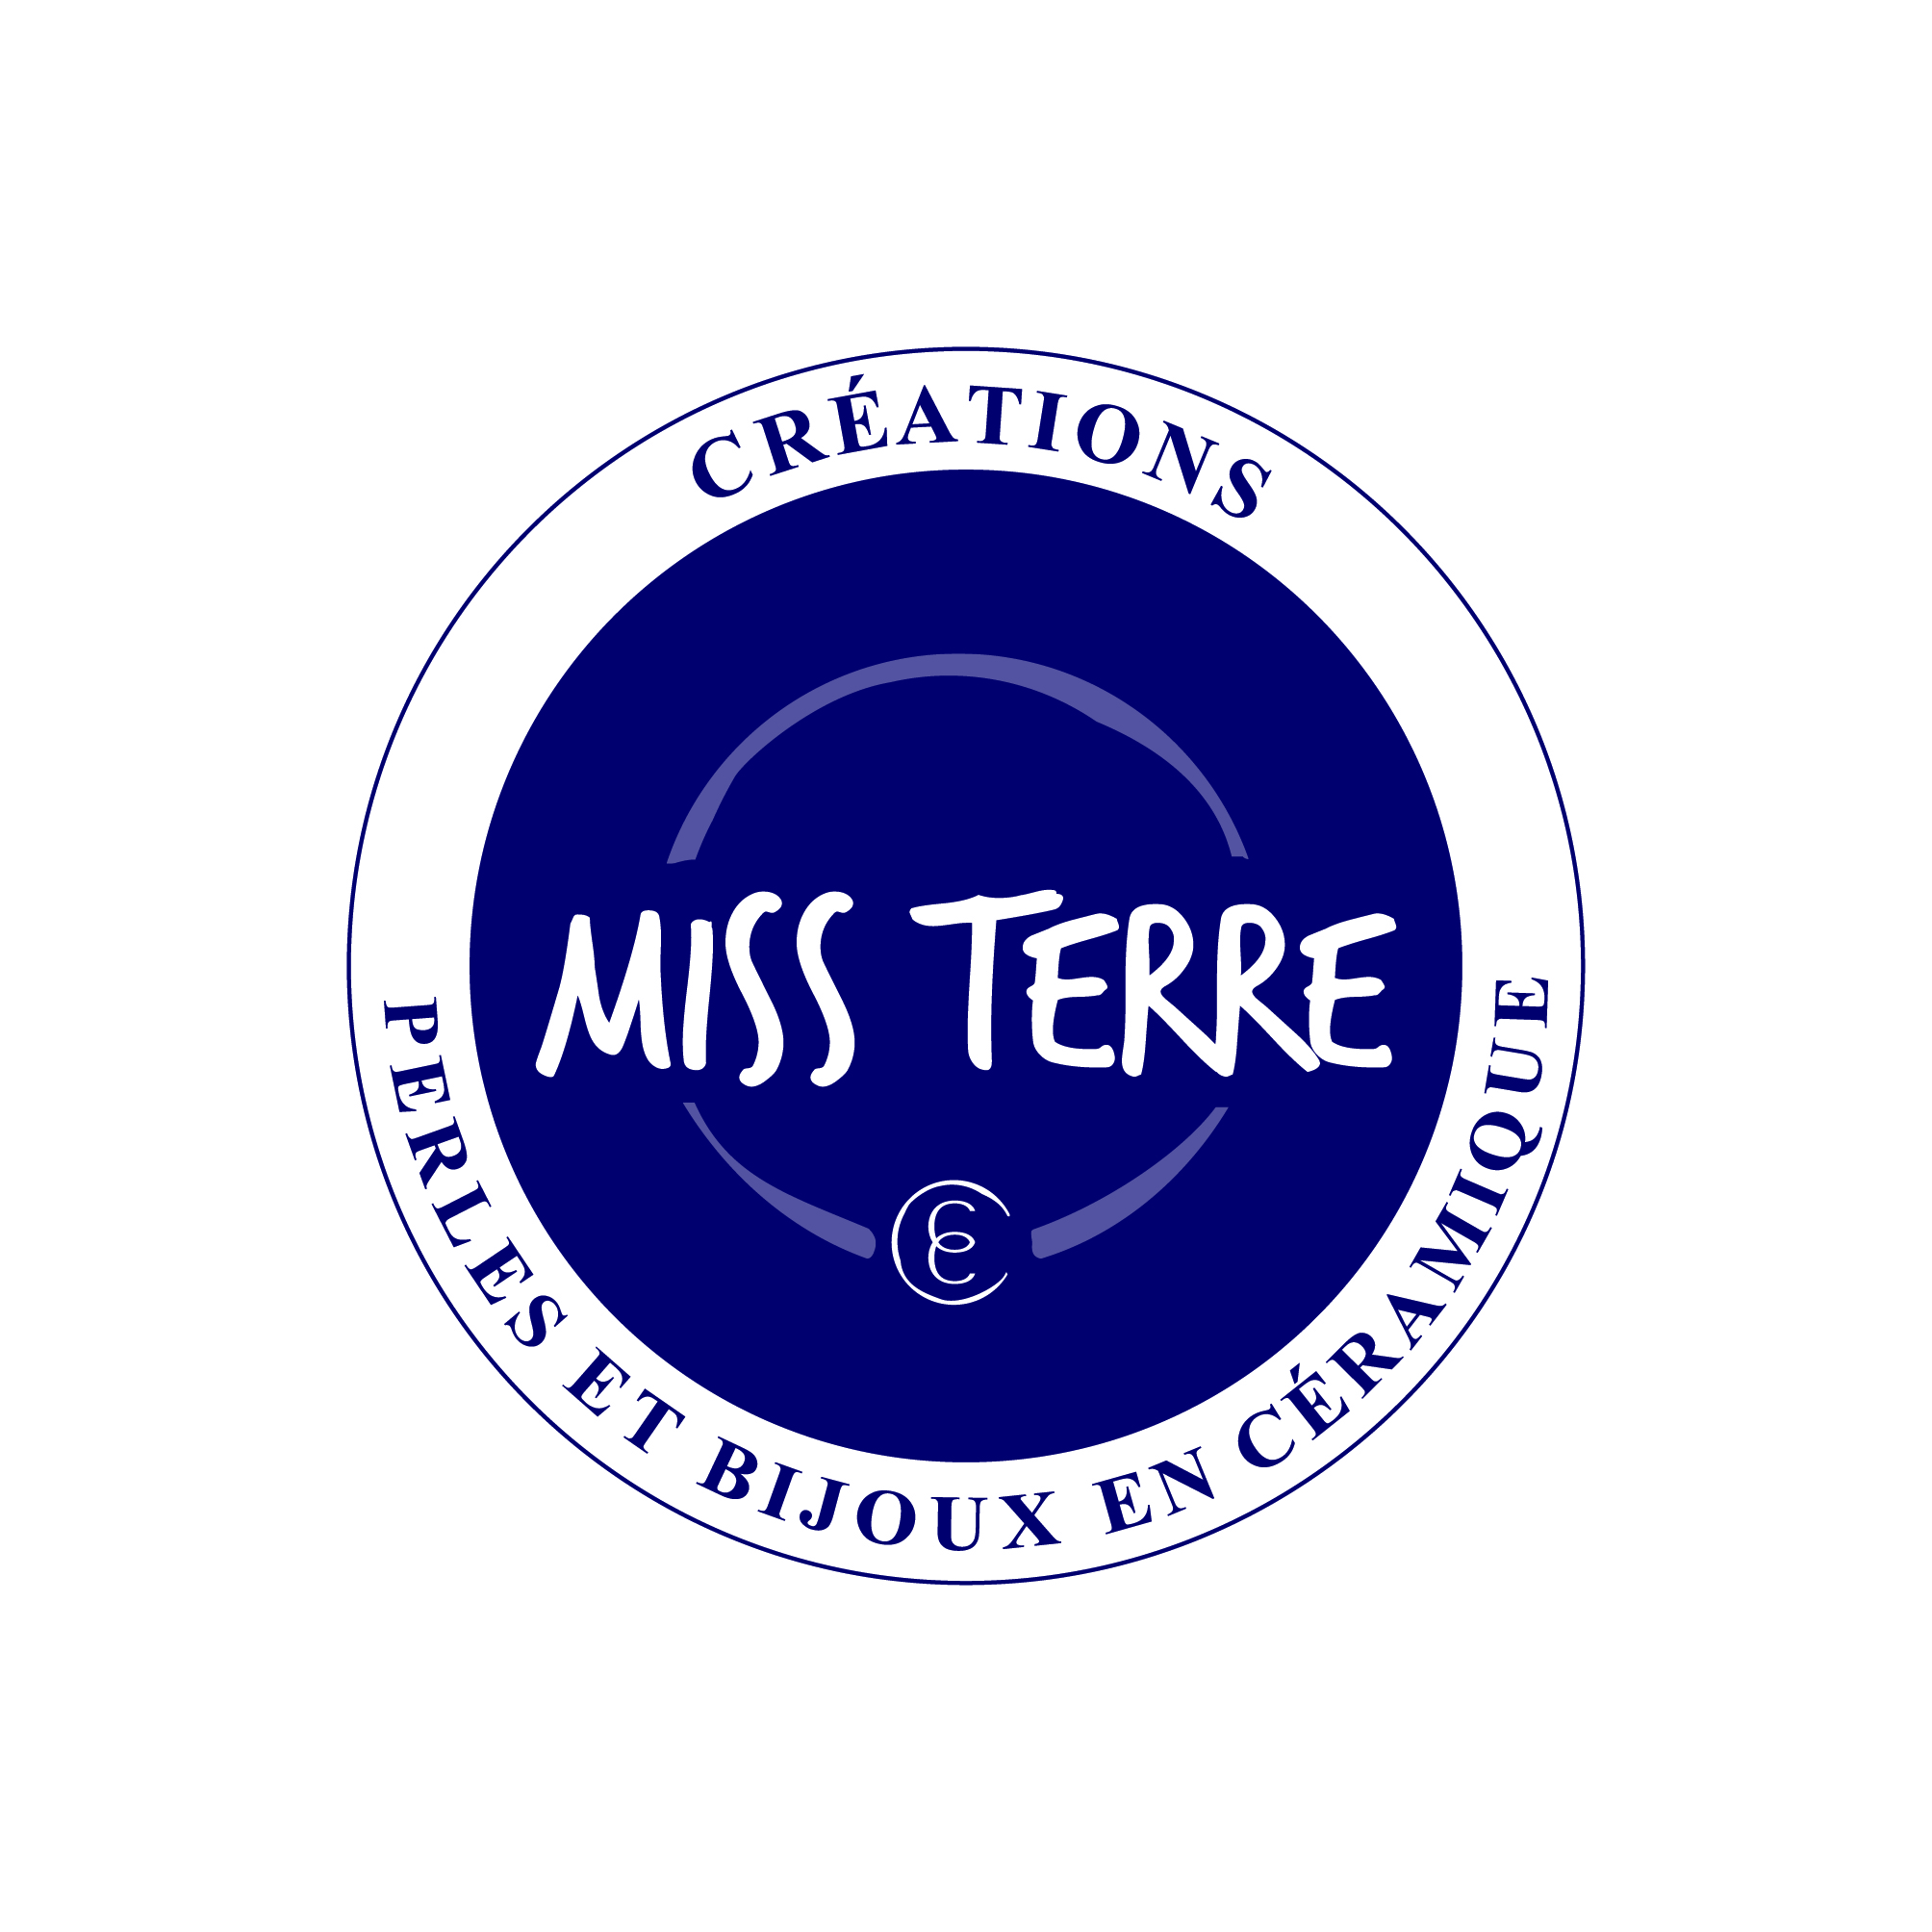 Créations MISS TERRE